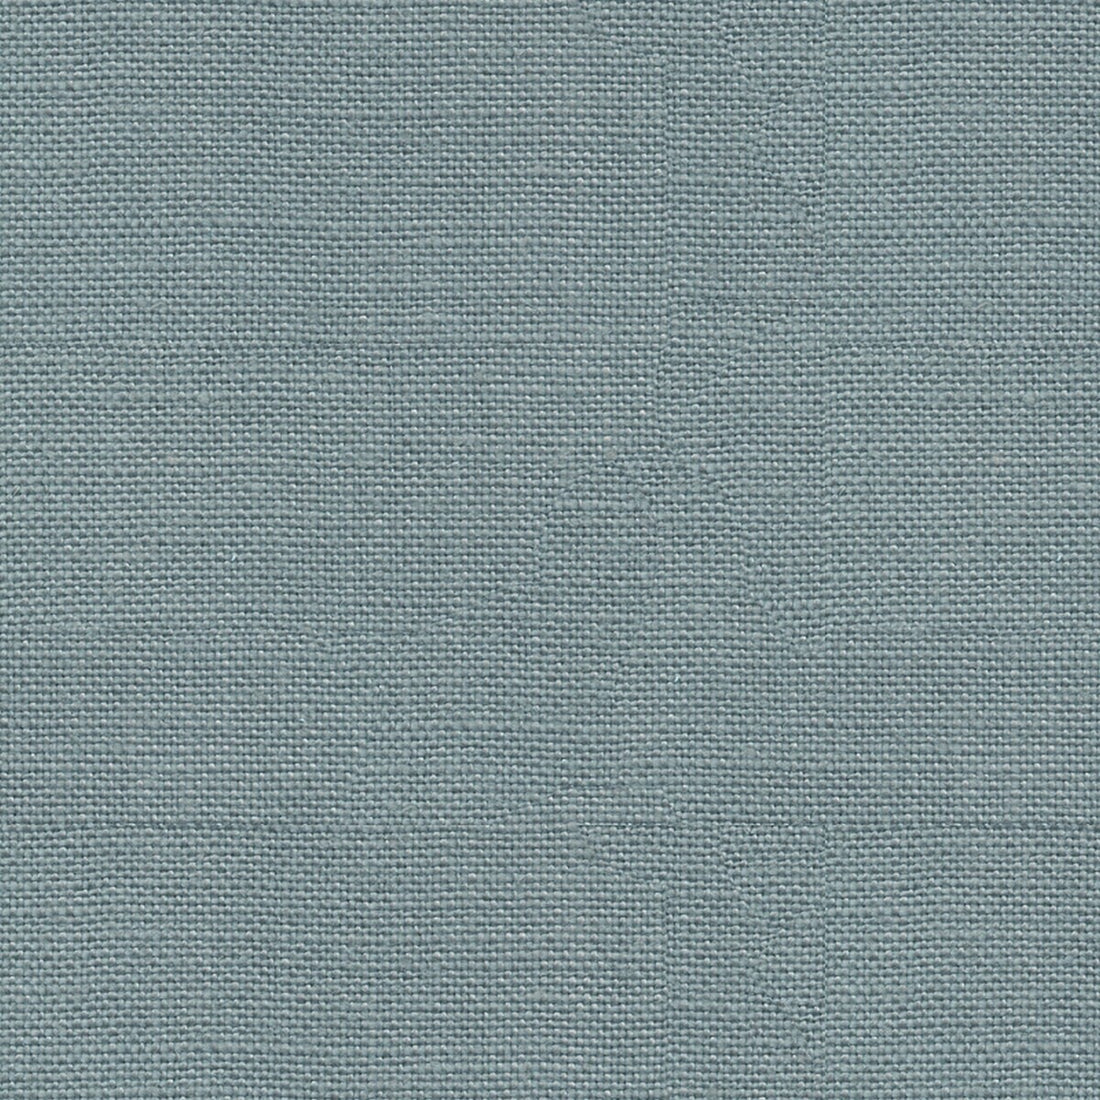 Newport fabric in aqua color - pattern ED85116.725.0 - by Threads in the Variation collection